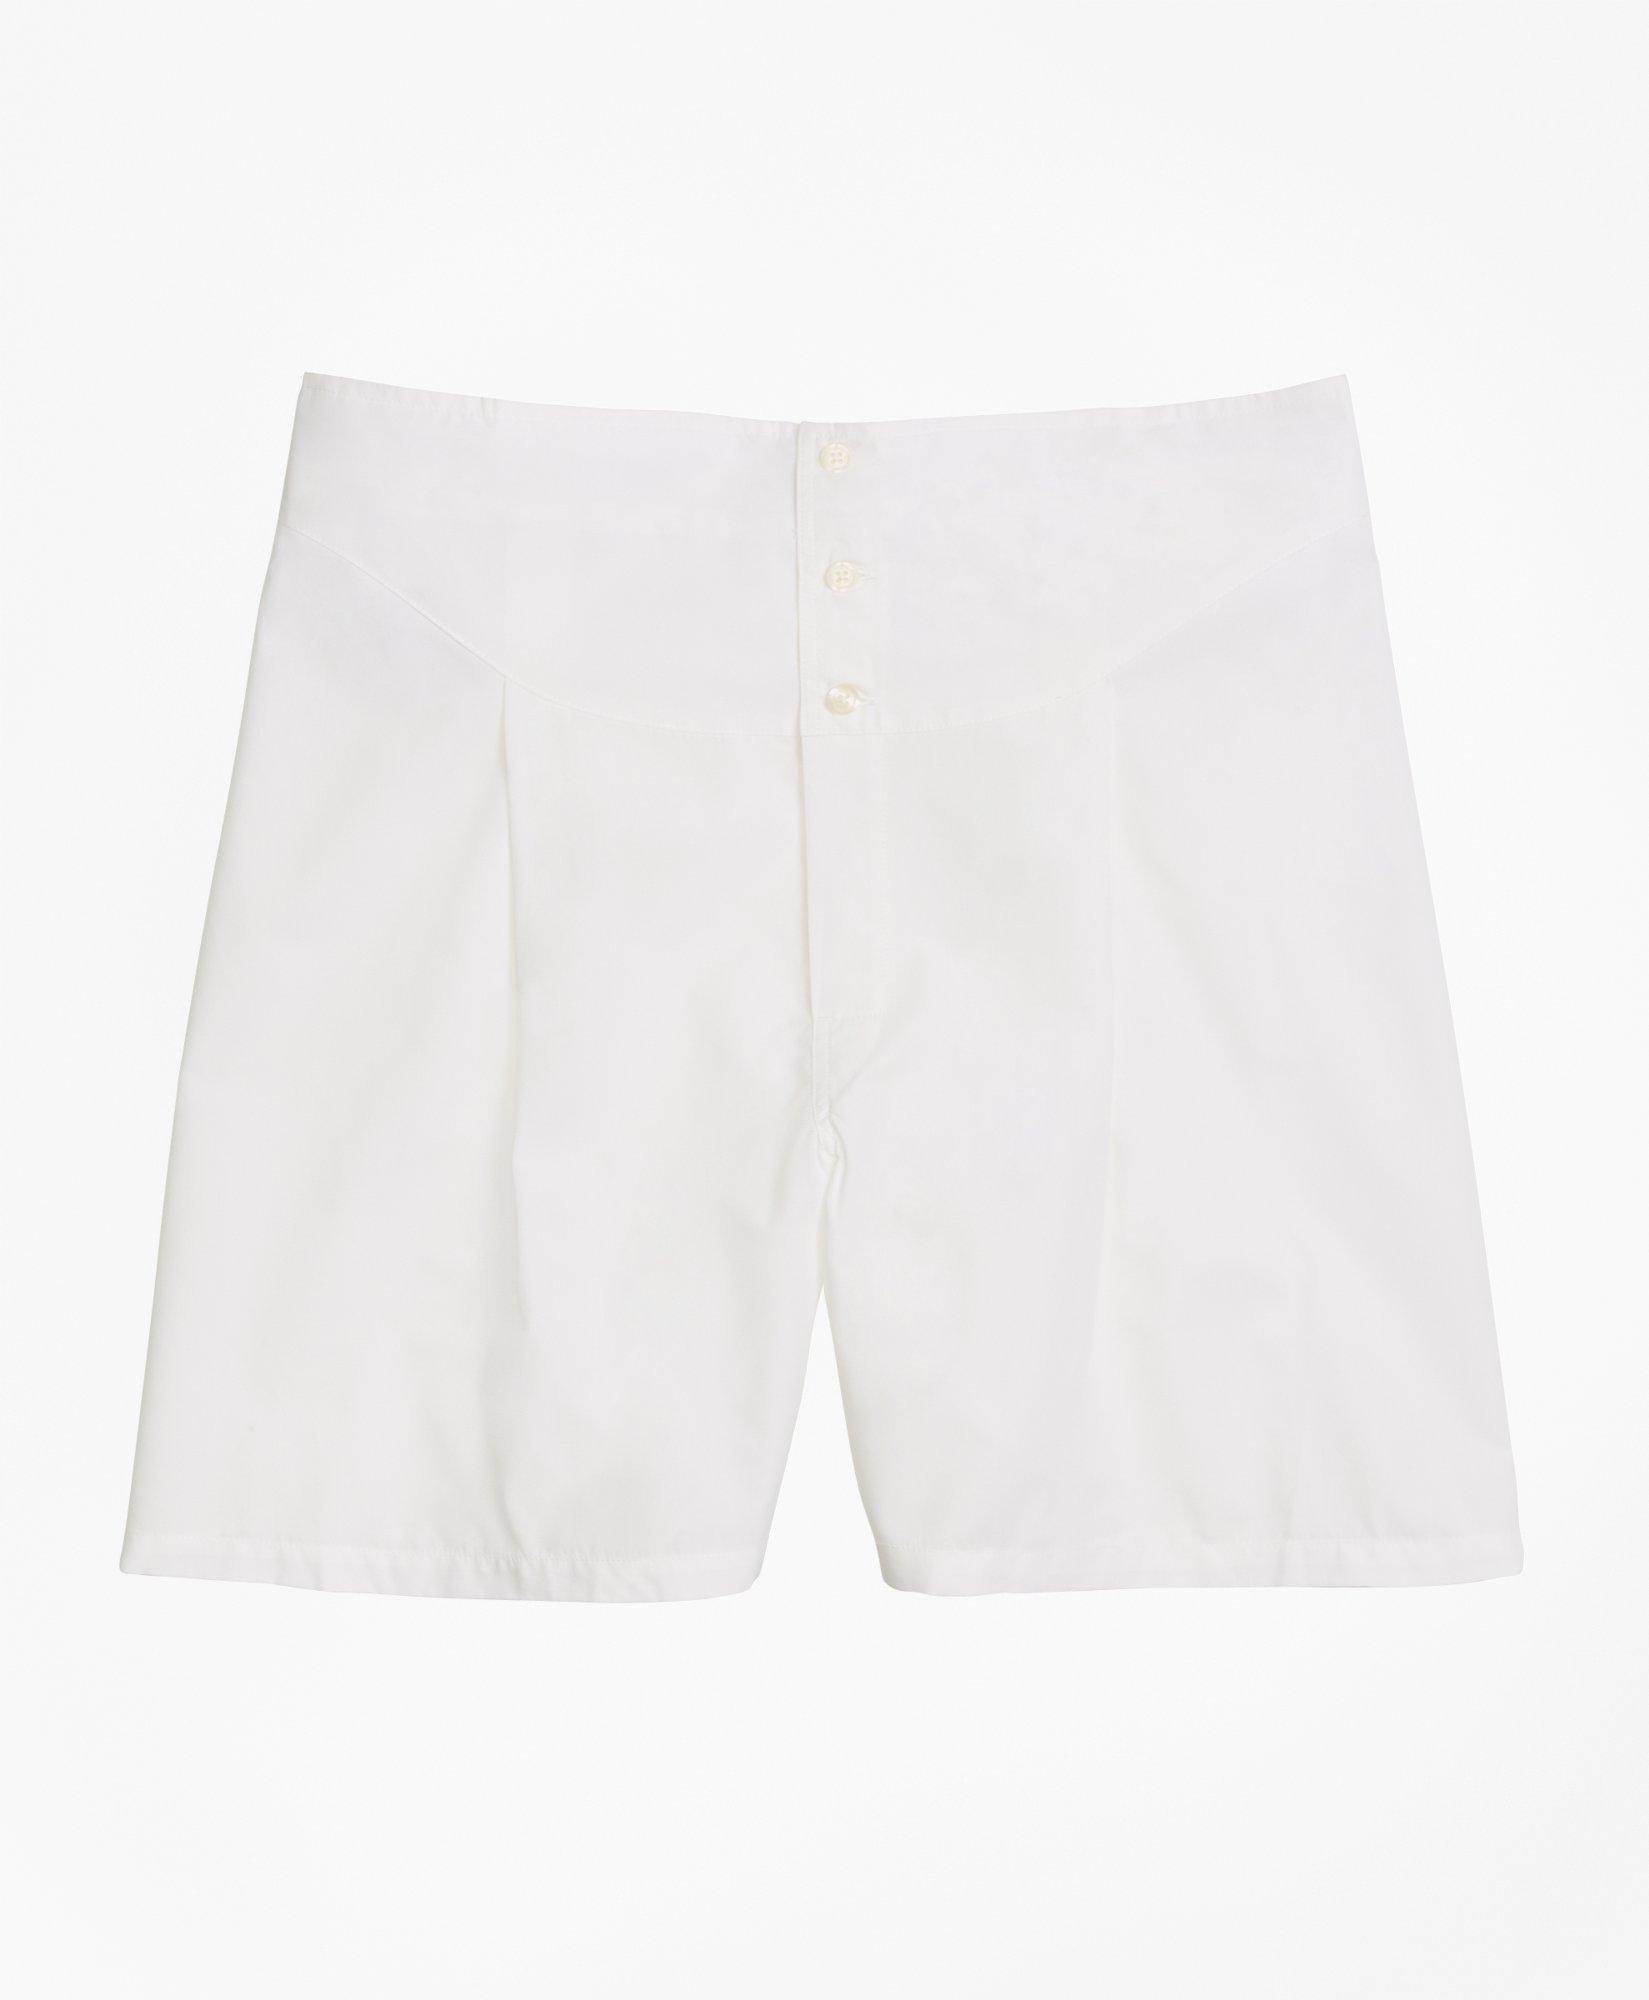 French Back Boxers, image 1